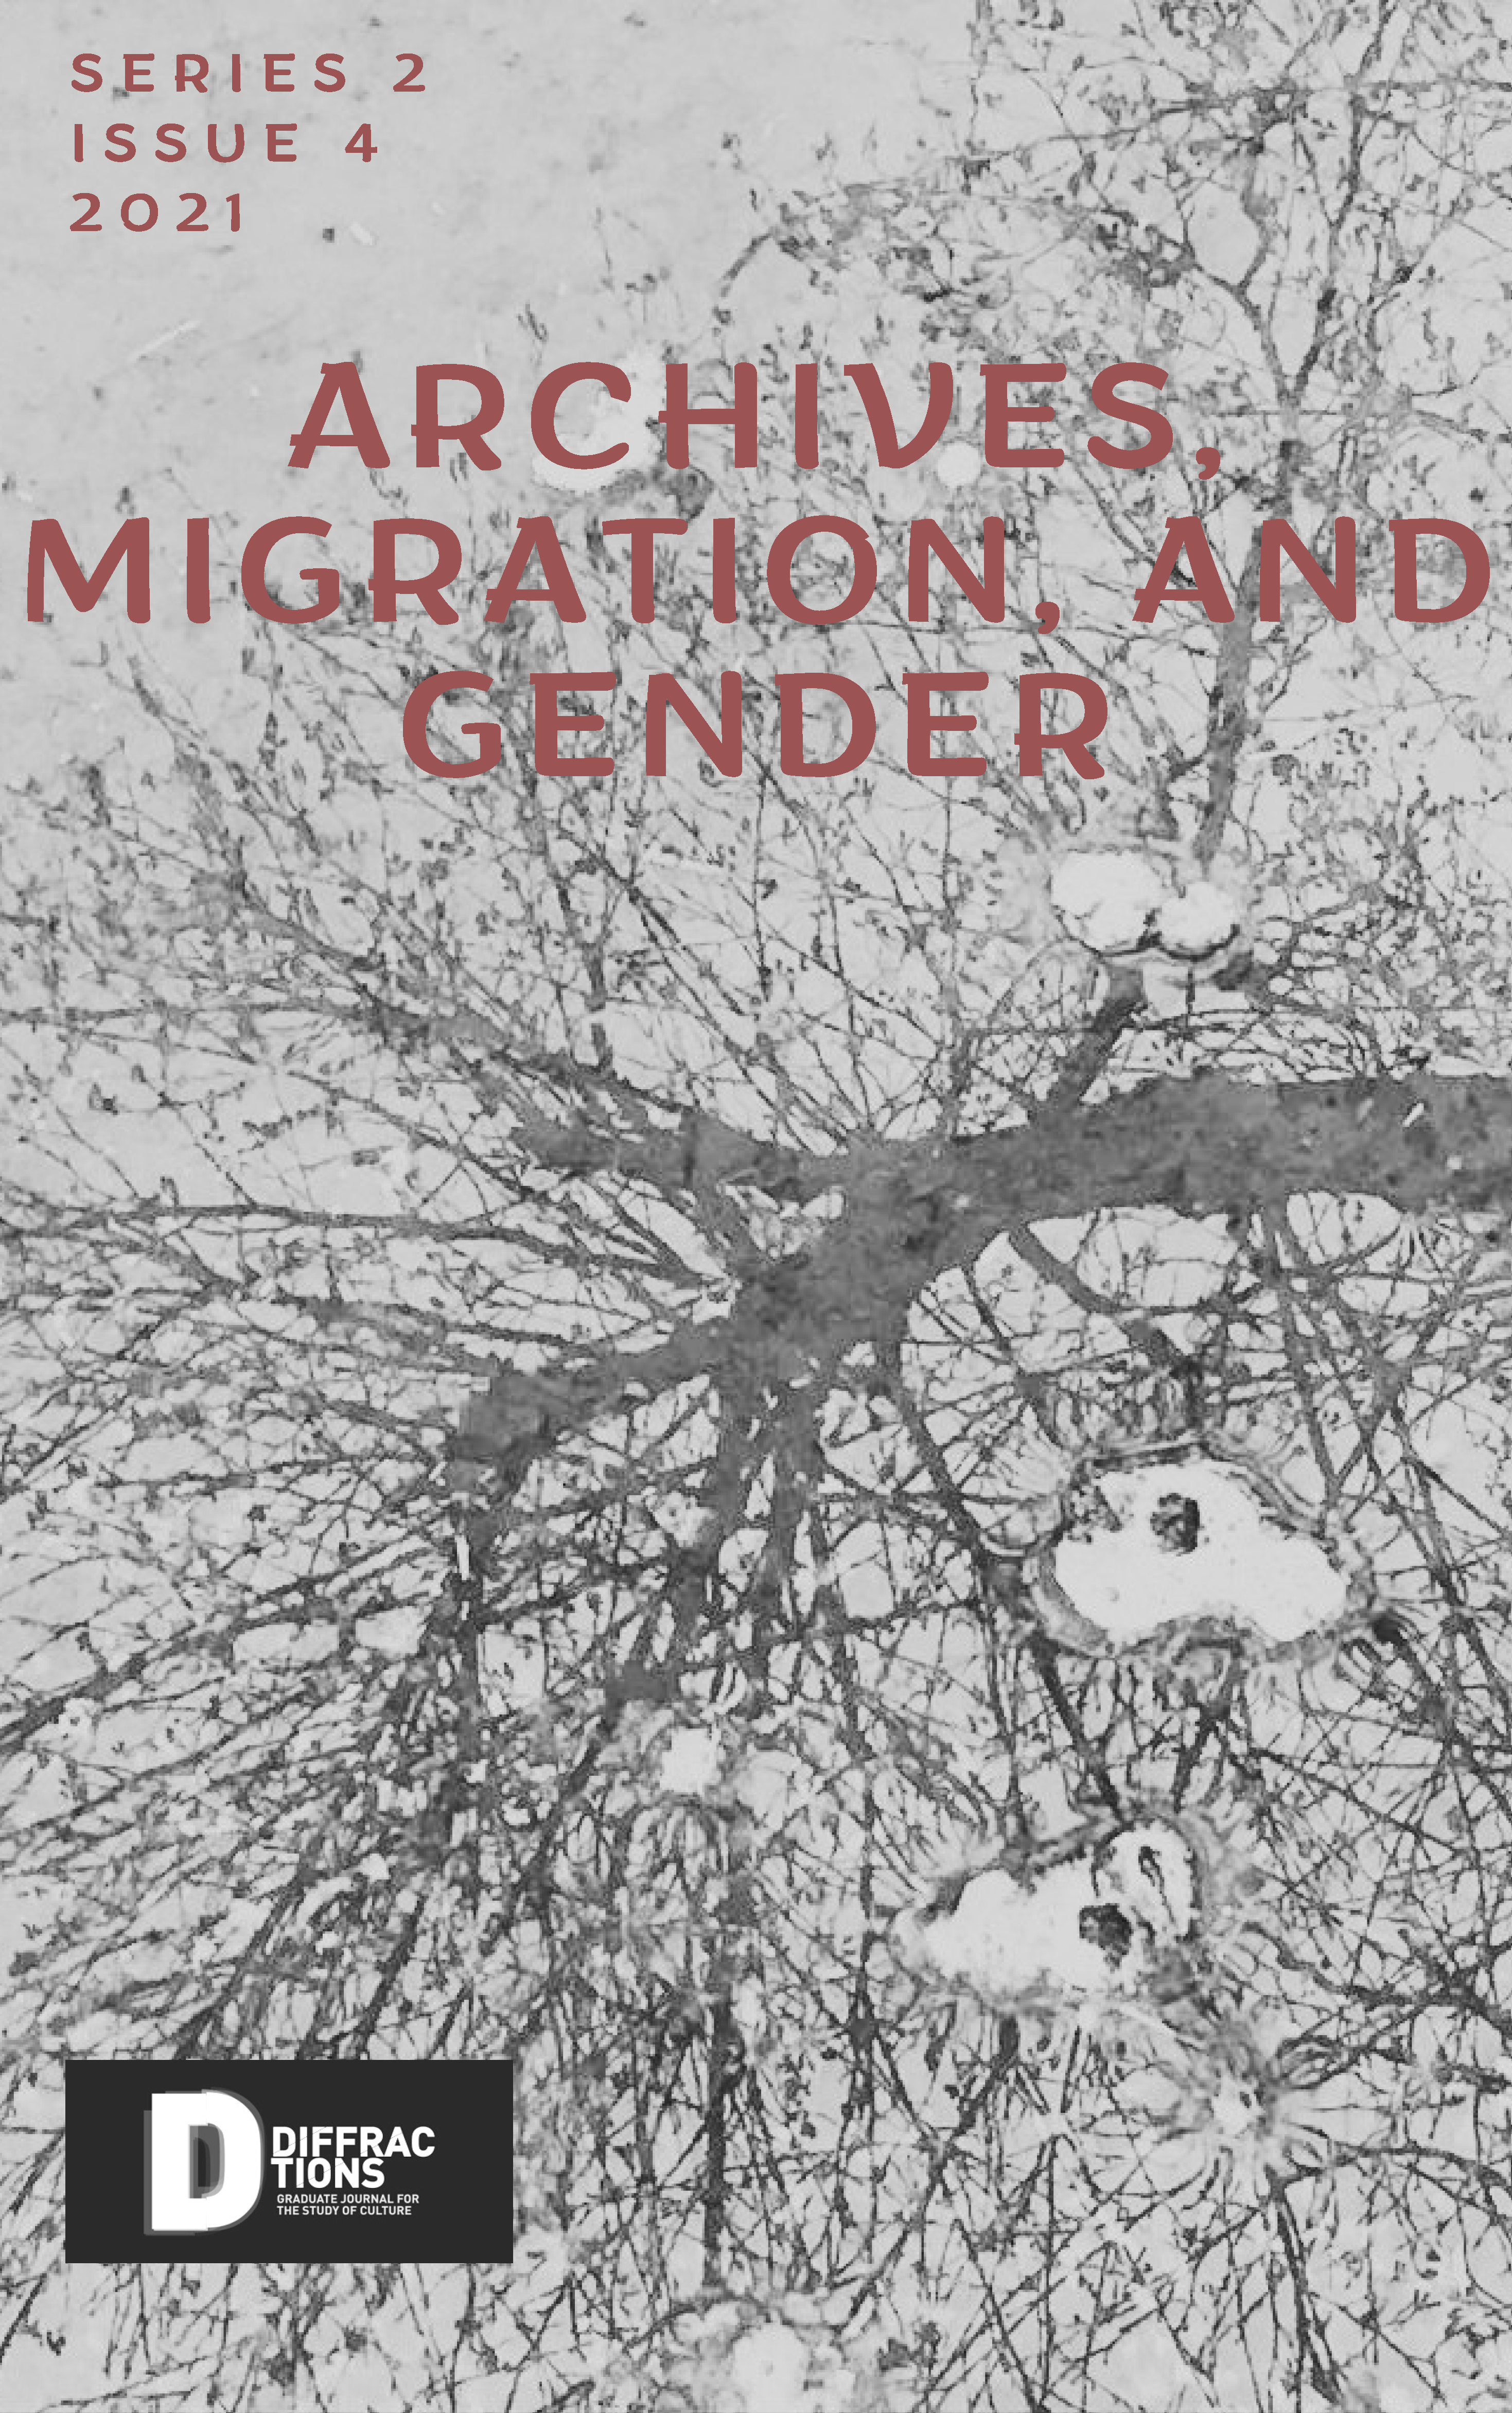 Diffractions, Series 2, Issue4, 2021, "Archies, Migration, and Gender"